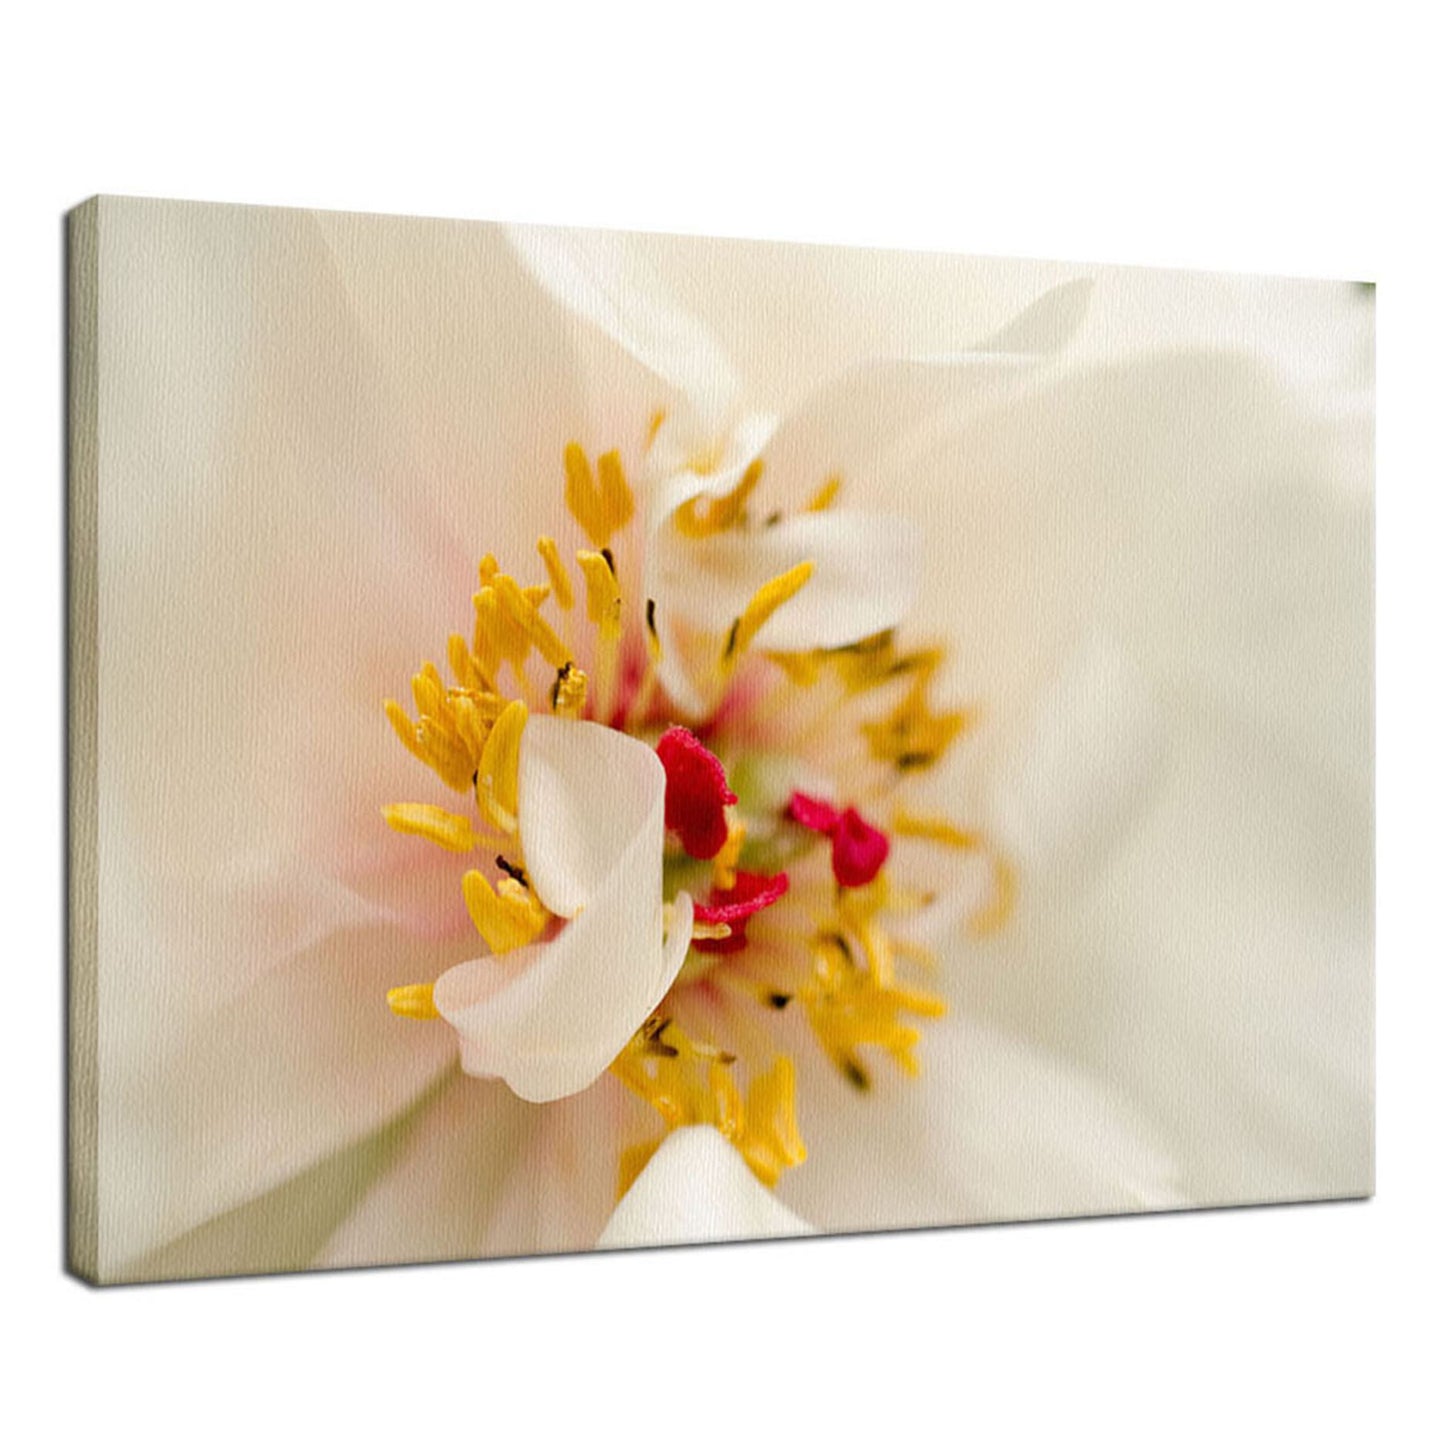 Eye of Peony Nature / Floral Photo Fine Art Canvas Wall Art Prints  - PIPAFINEART